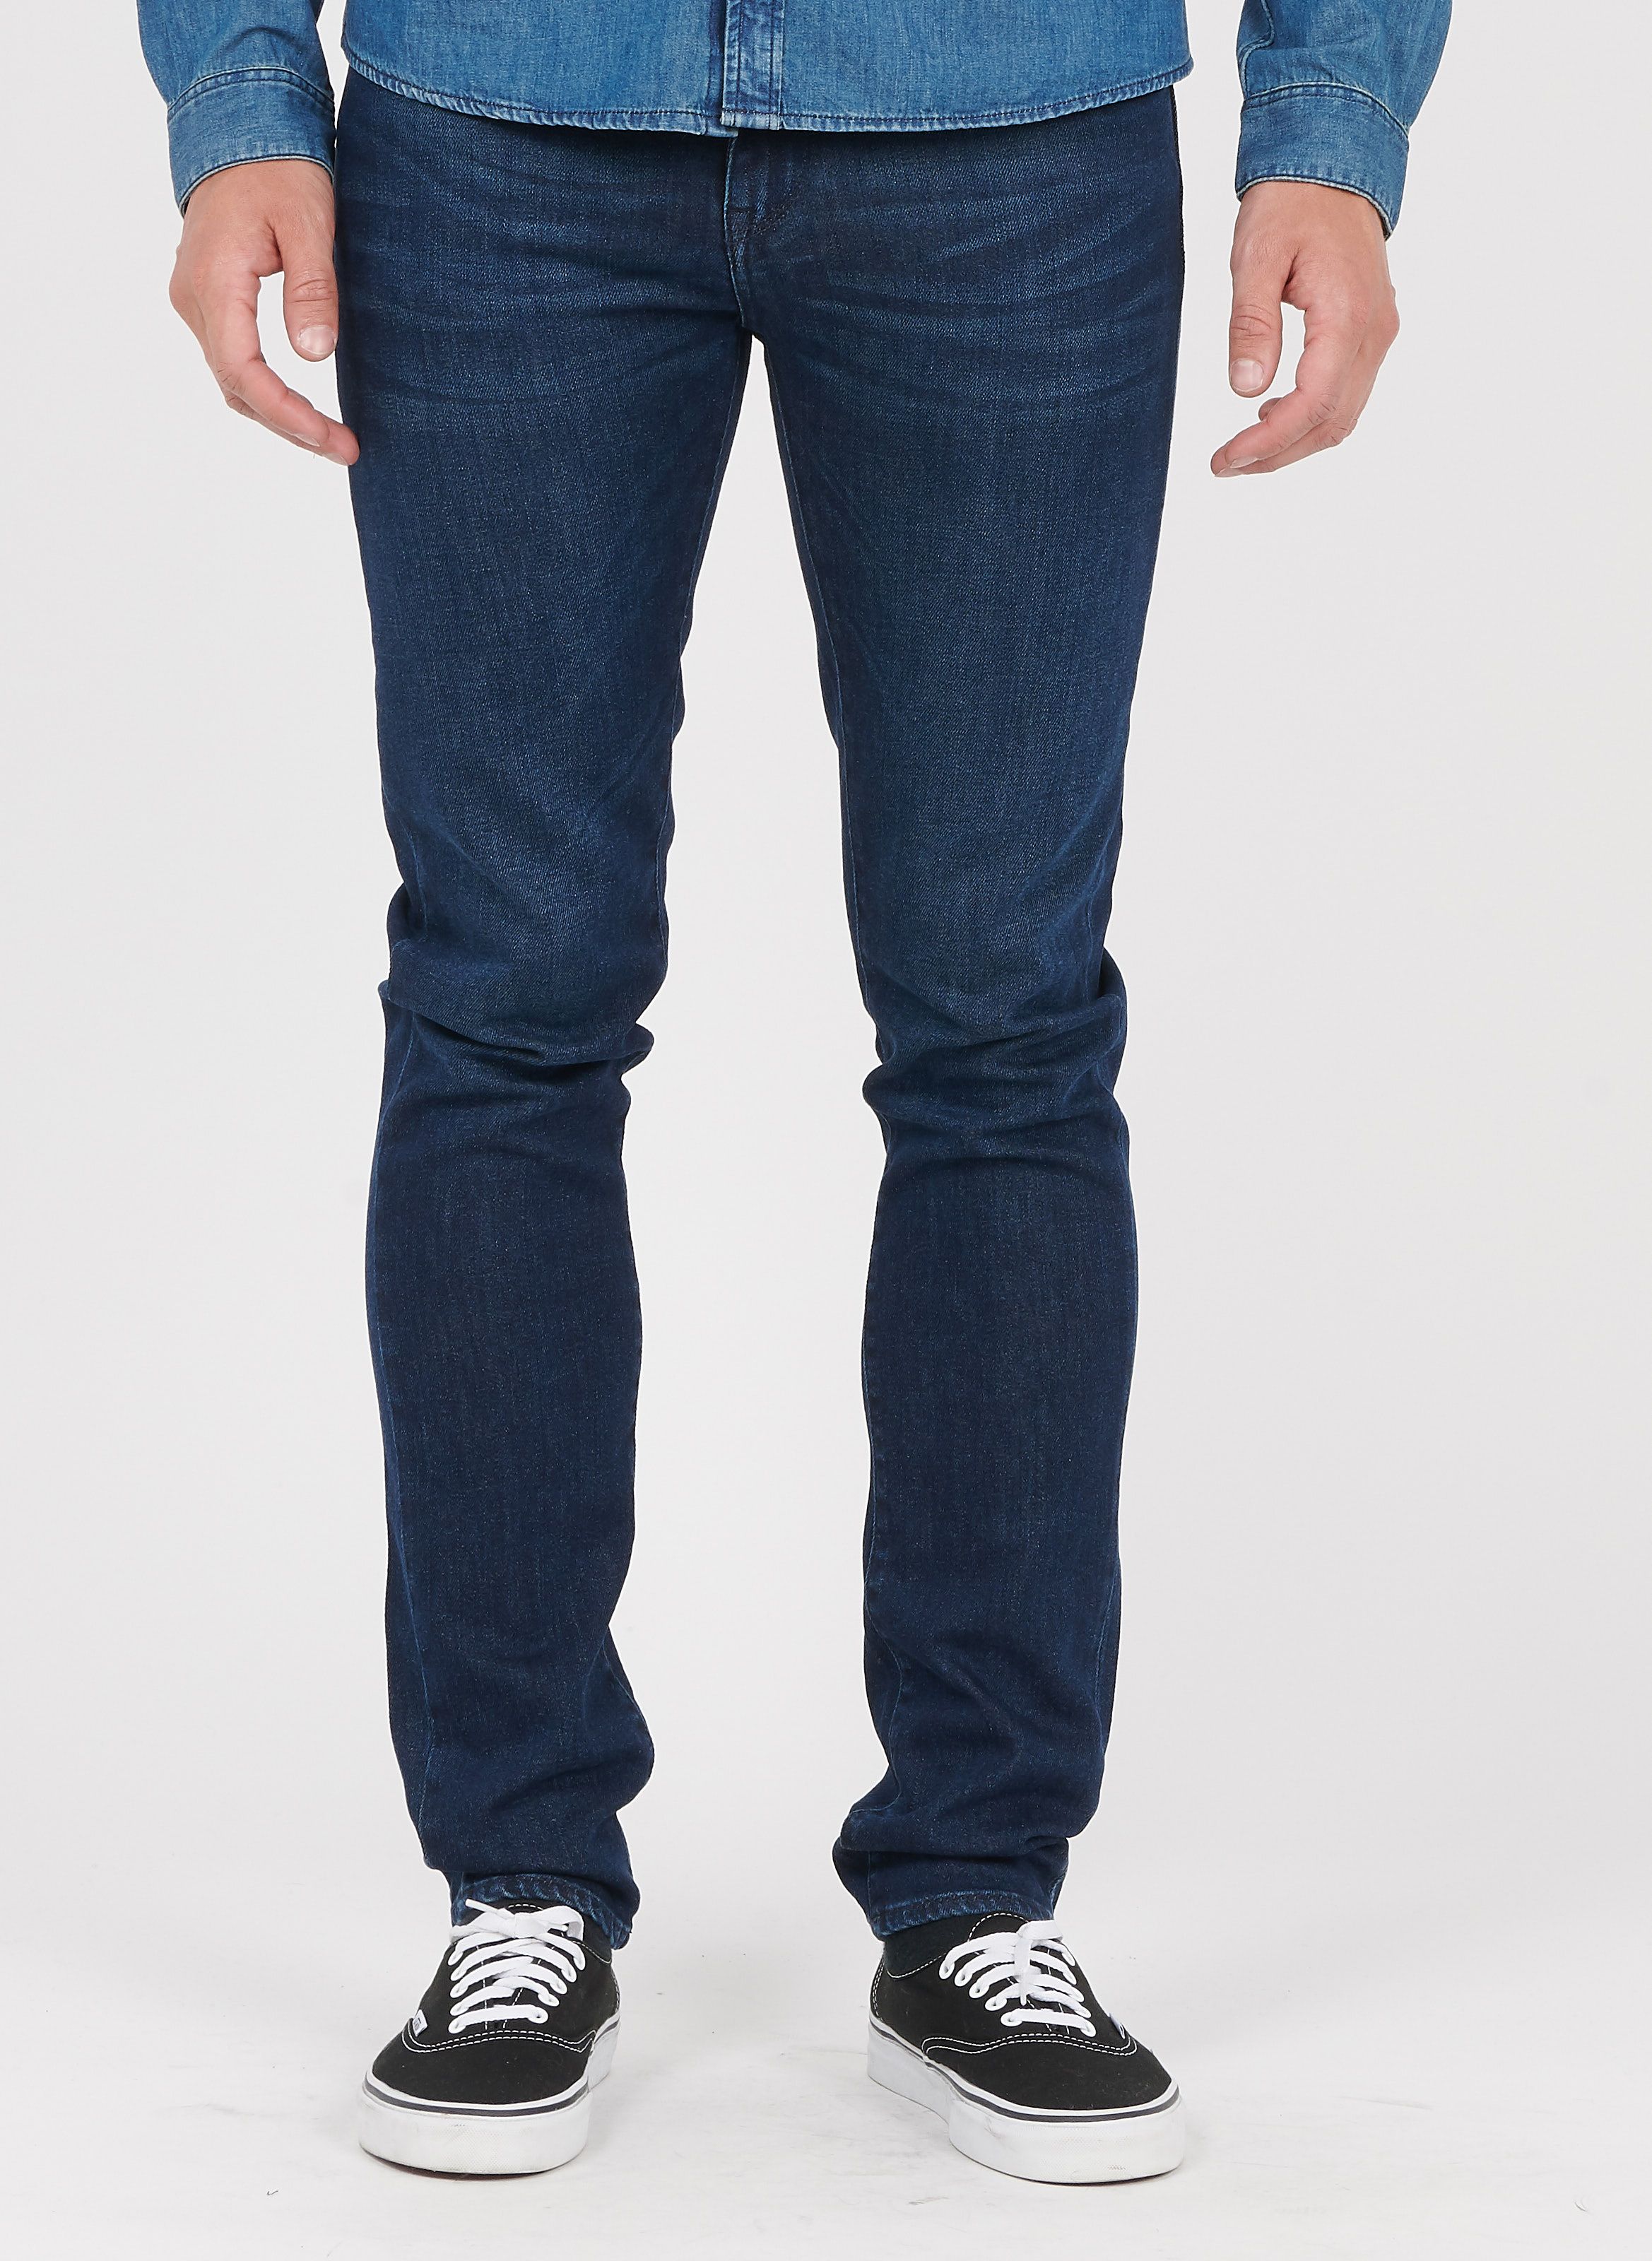 5-pocket Jeans - Double Belt Loops At The Back Width At The Bottom ...